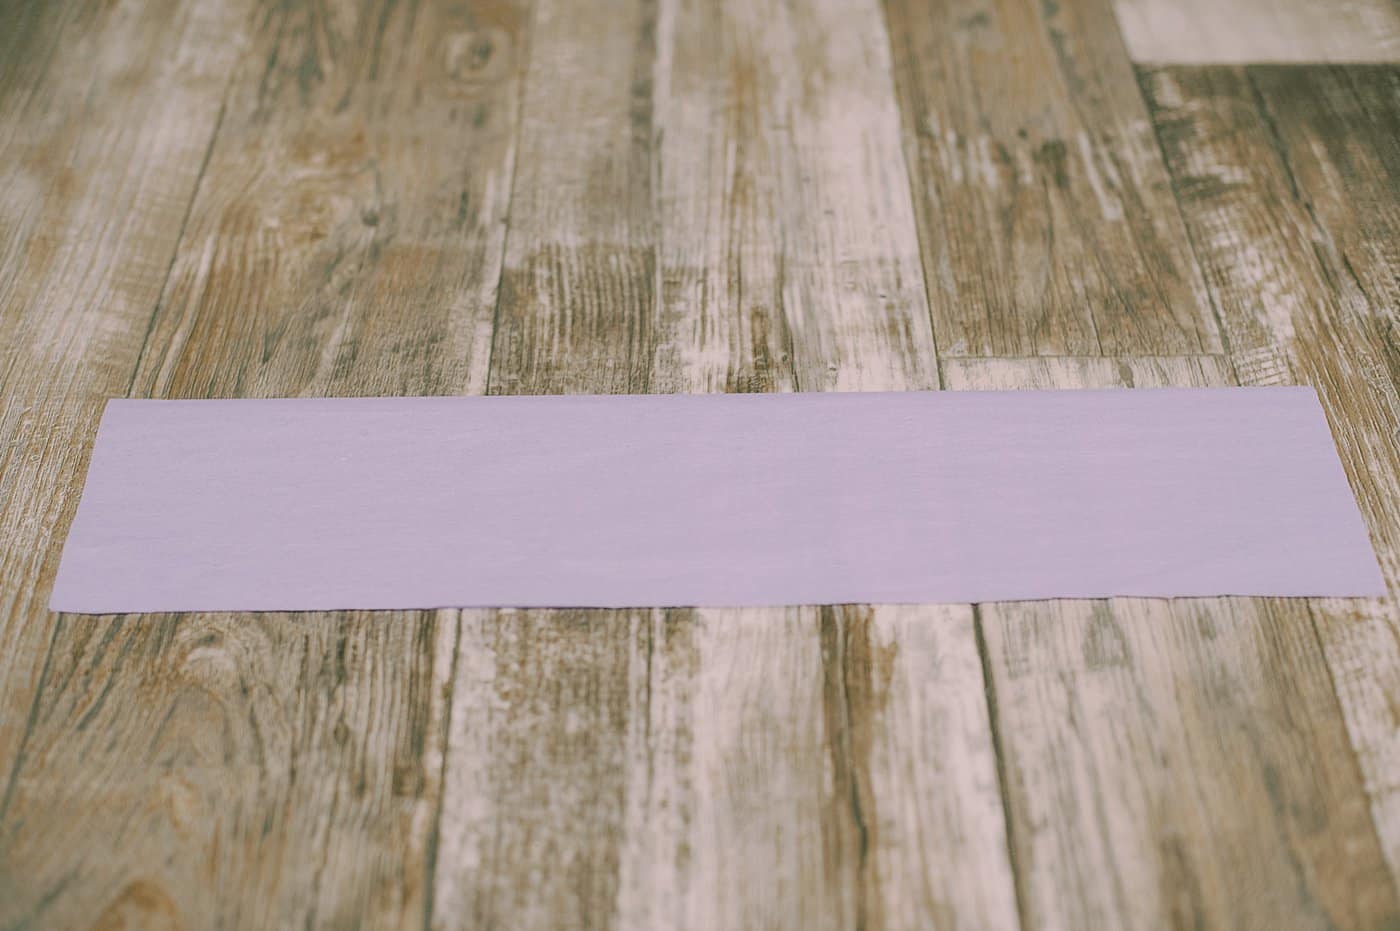 Cut along the bottom edge of the tissue paper, about ½" to ¾" thick strips.